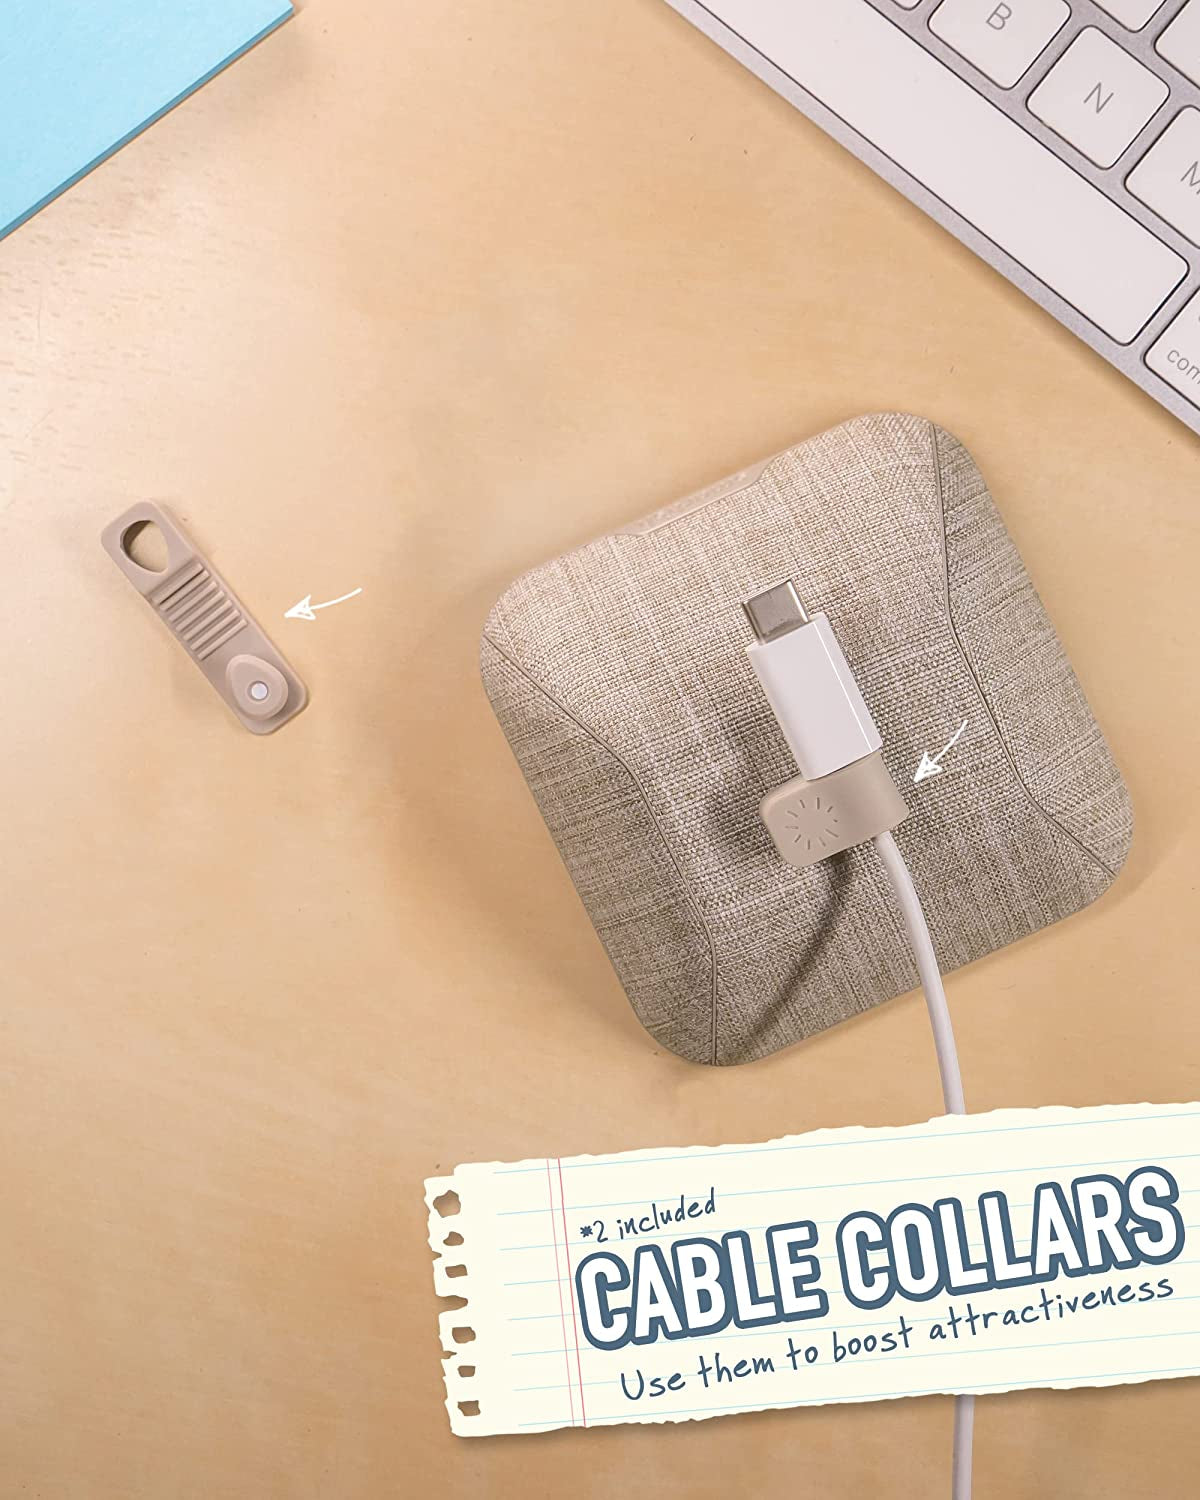 Magnetic Cord Holder - Cable Wrangler Organizer with Magnet Clips for Charger Management on Desktop, Nightstand, or Side Table - Lightly Toasted Beige